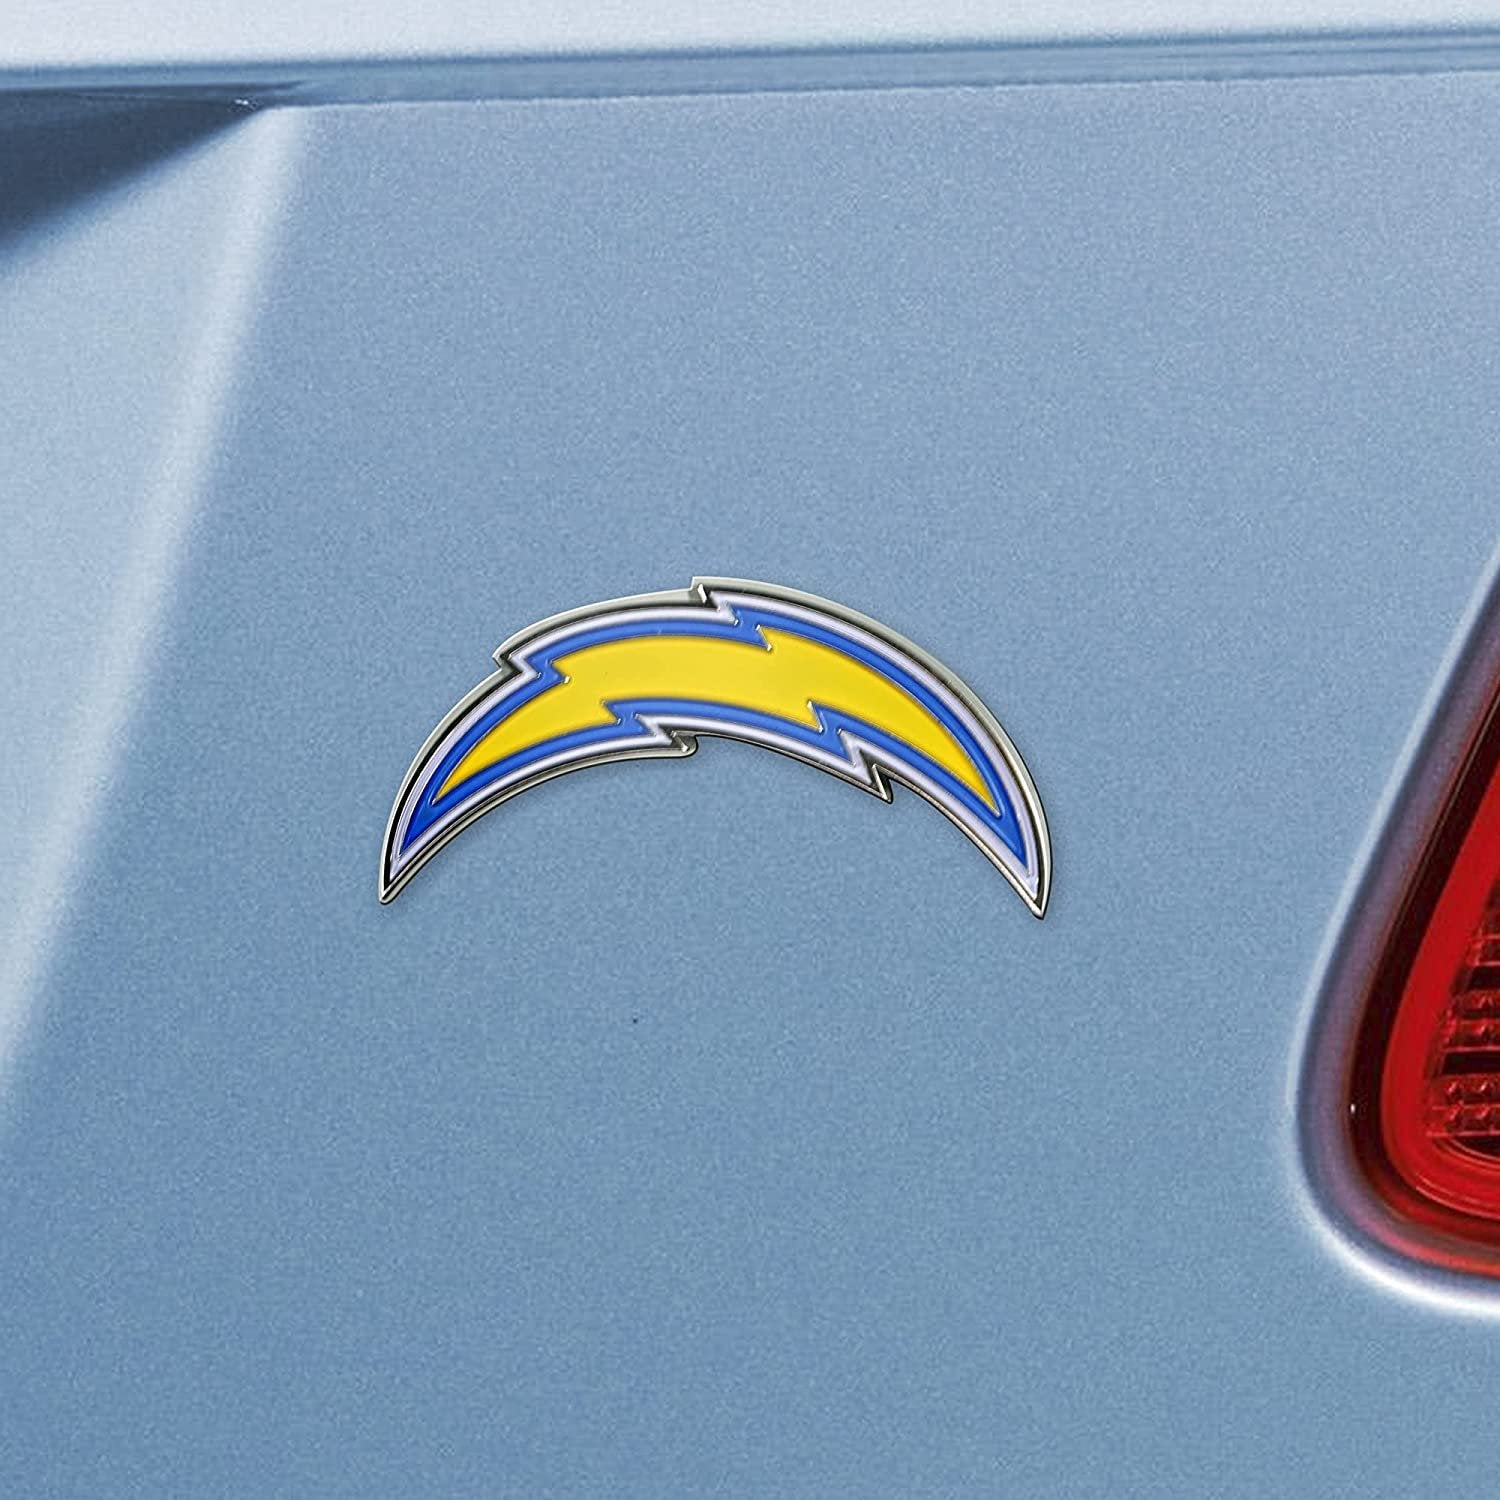 Los Angeles Chargers Premium Solid Metal Raised Auto Emblem, Team Color, Shape Cut, Adhesive Backing